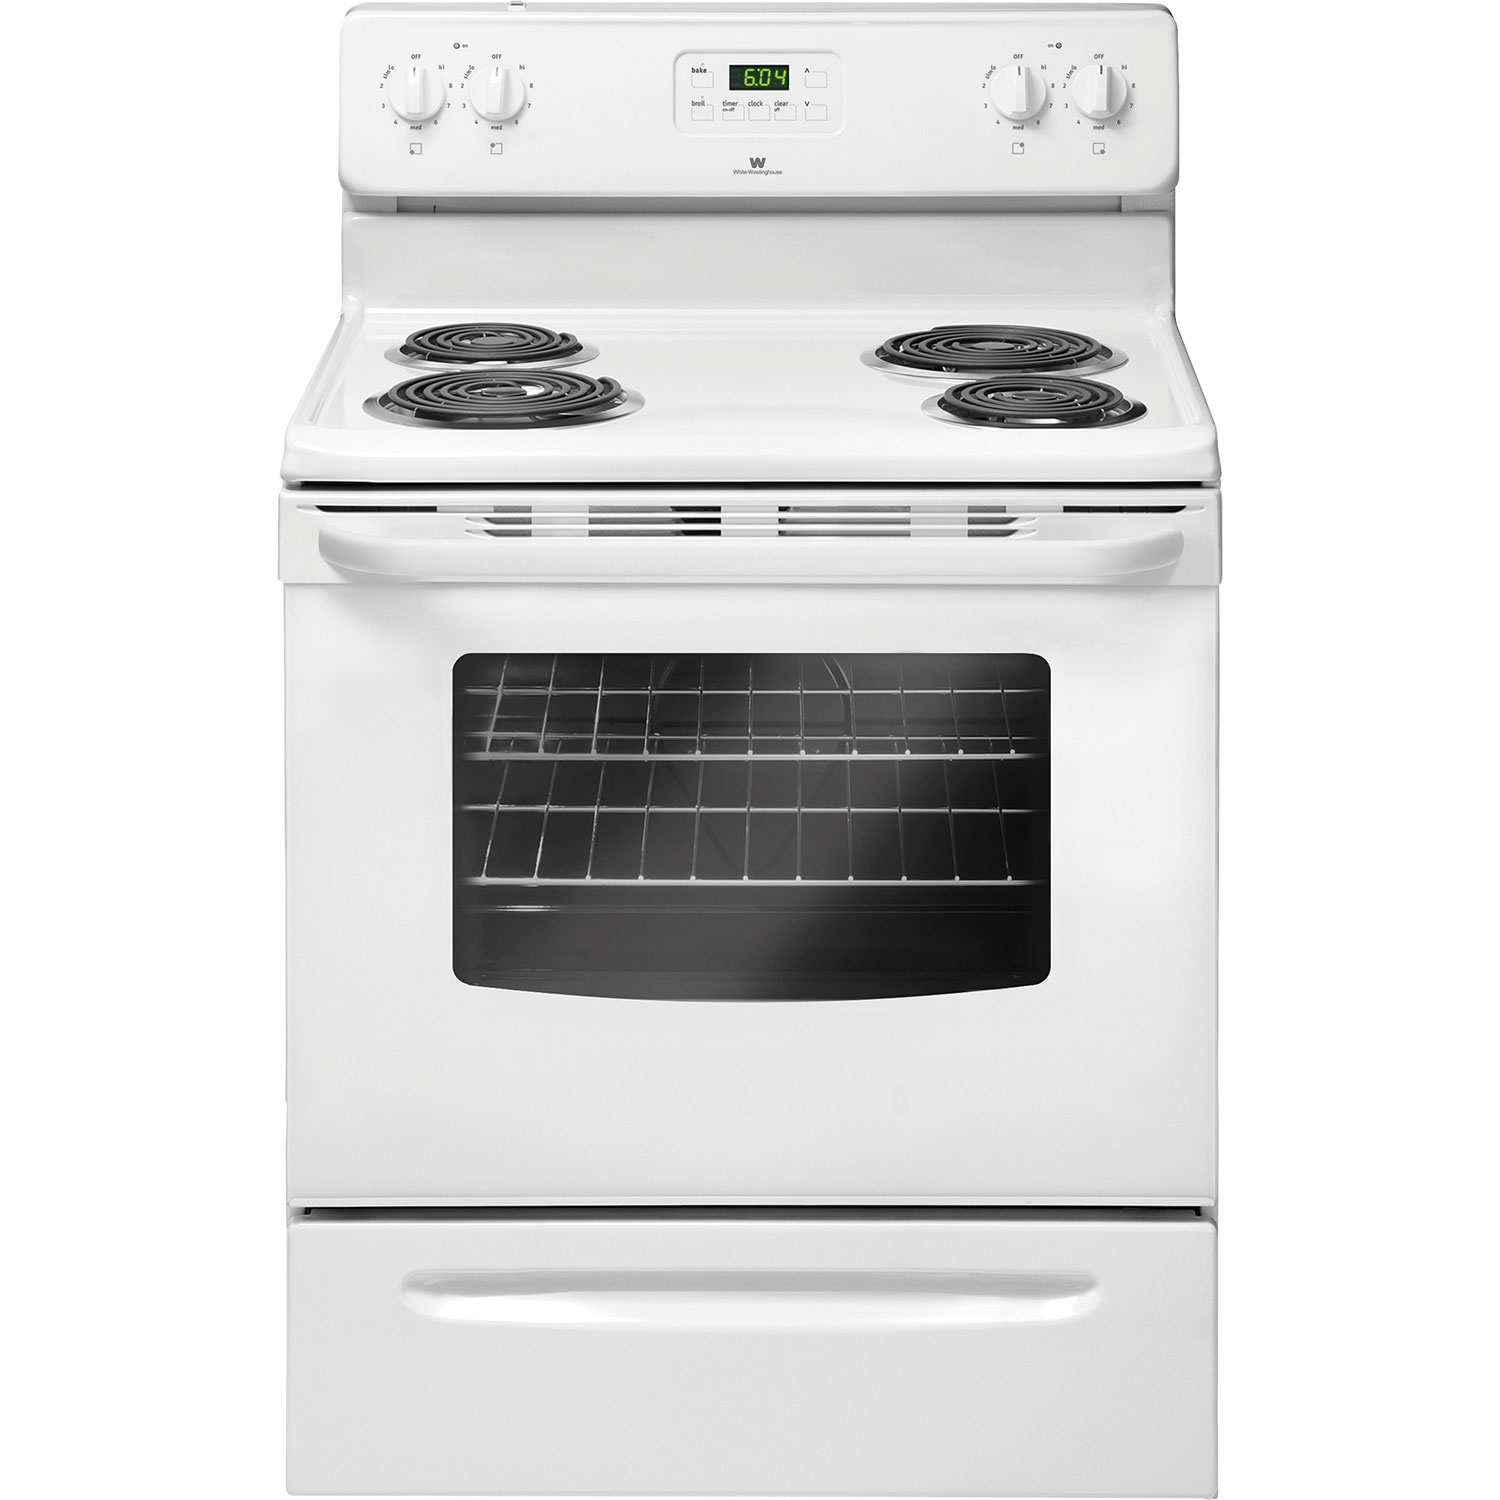 What are the best electric range manufacturers?